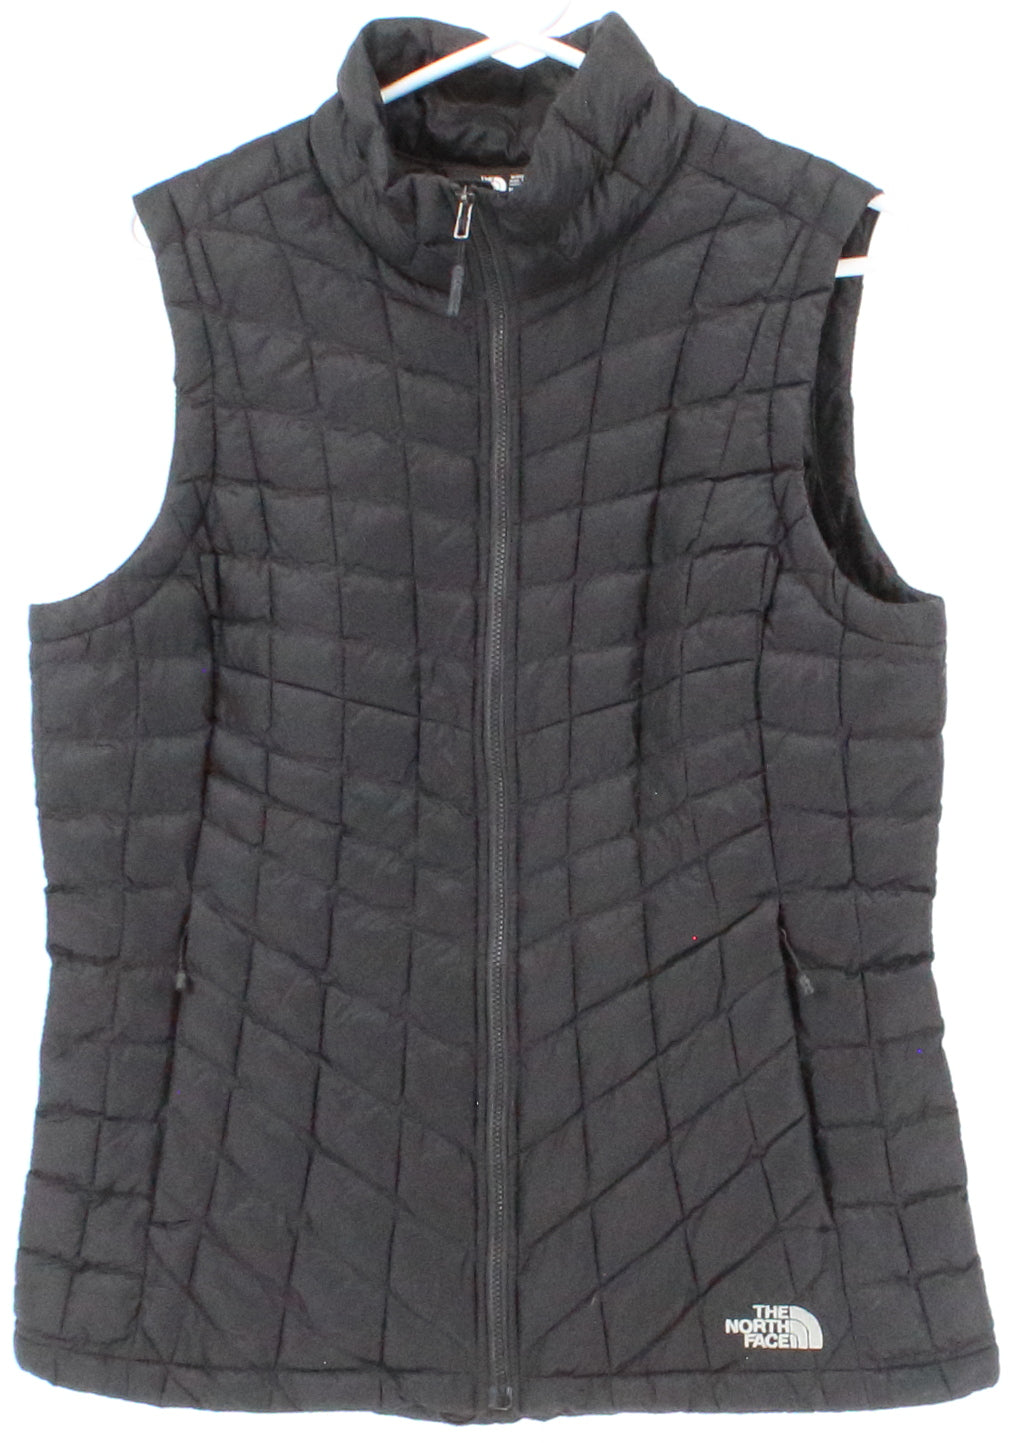 The North Face Thermoball Black Puffer Women's Vest